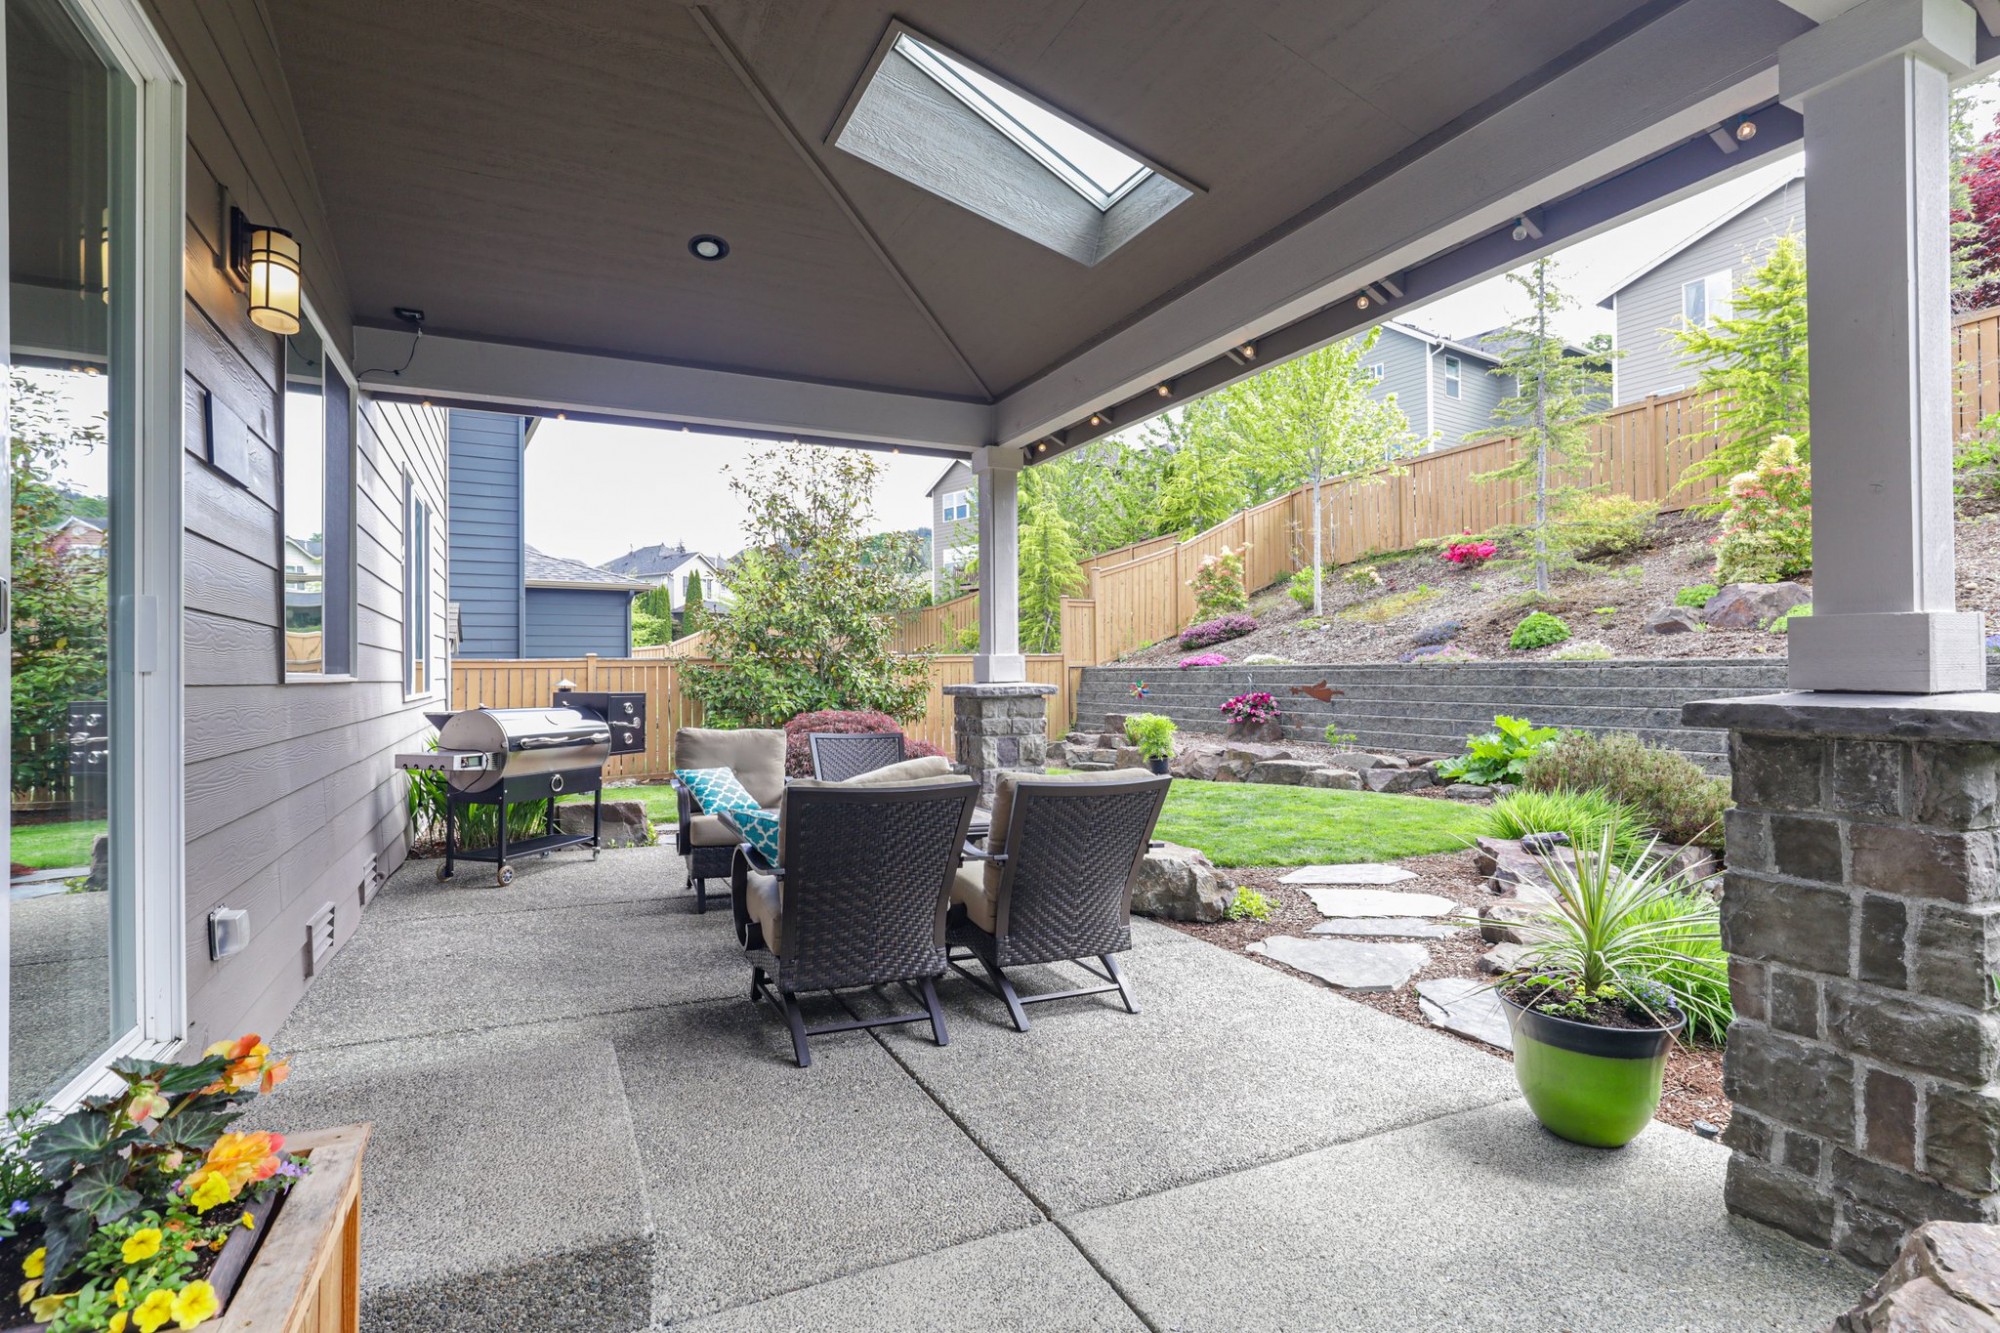 Covered patio with skylight to let the sunshine in. BBQ, rain or shine!